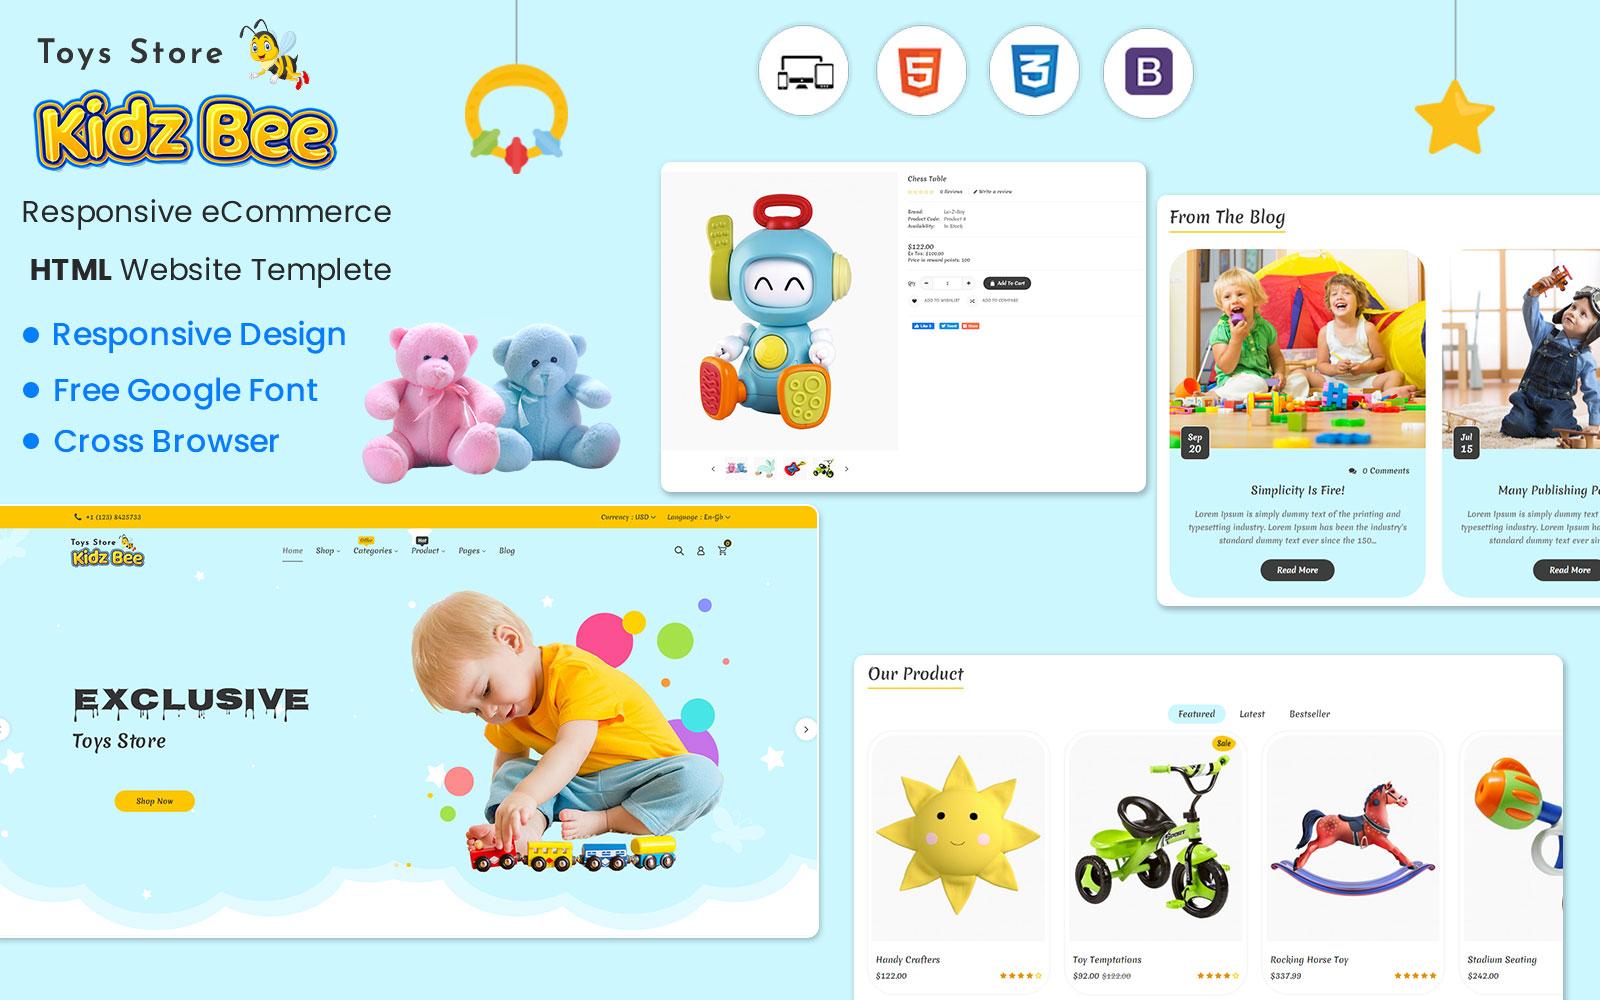 KidsBee Web - Get Playful with our Fun and Colorful HTML Web Template for Kids Toys! Website Template